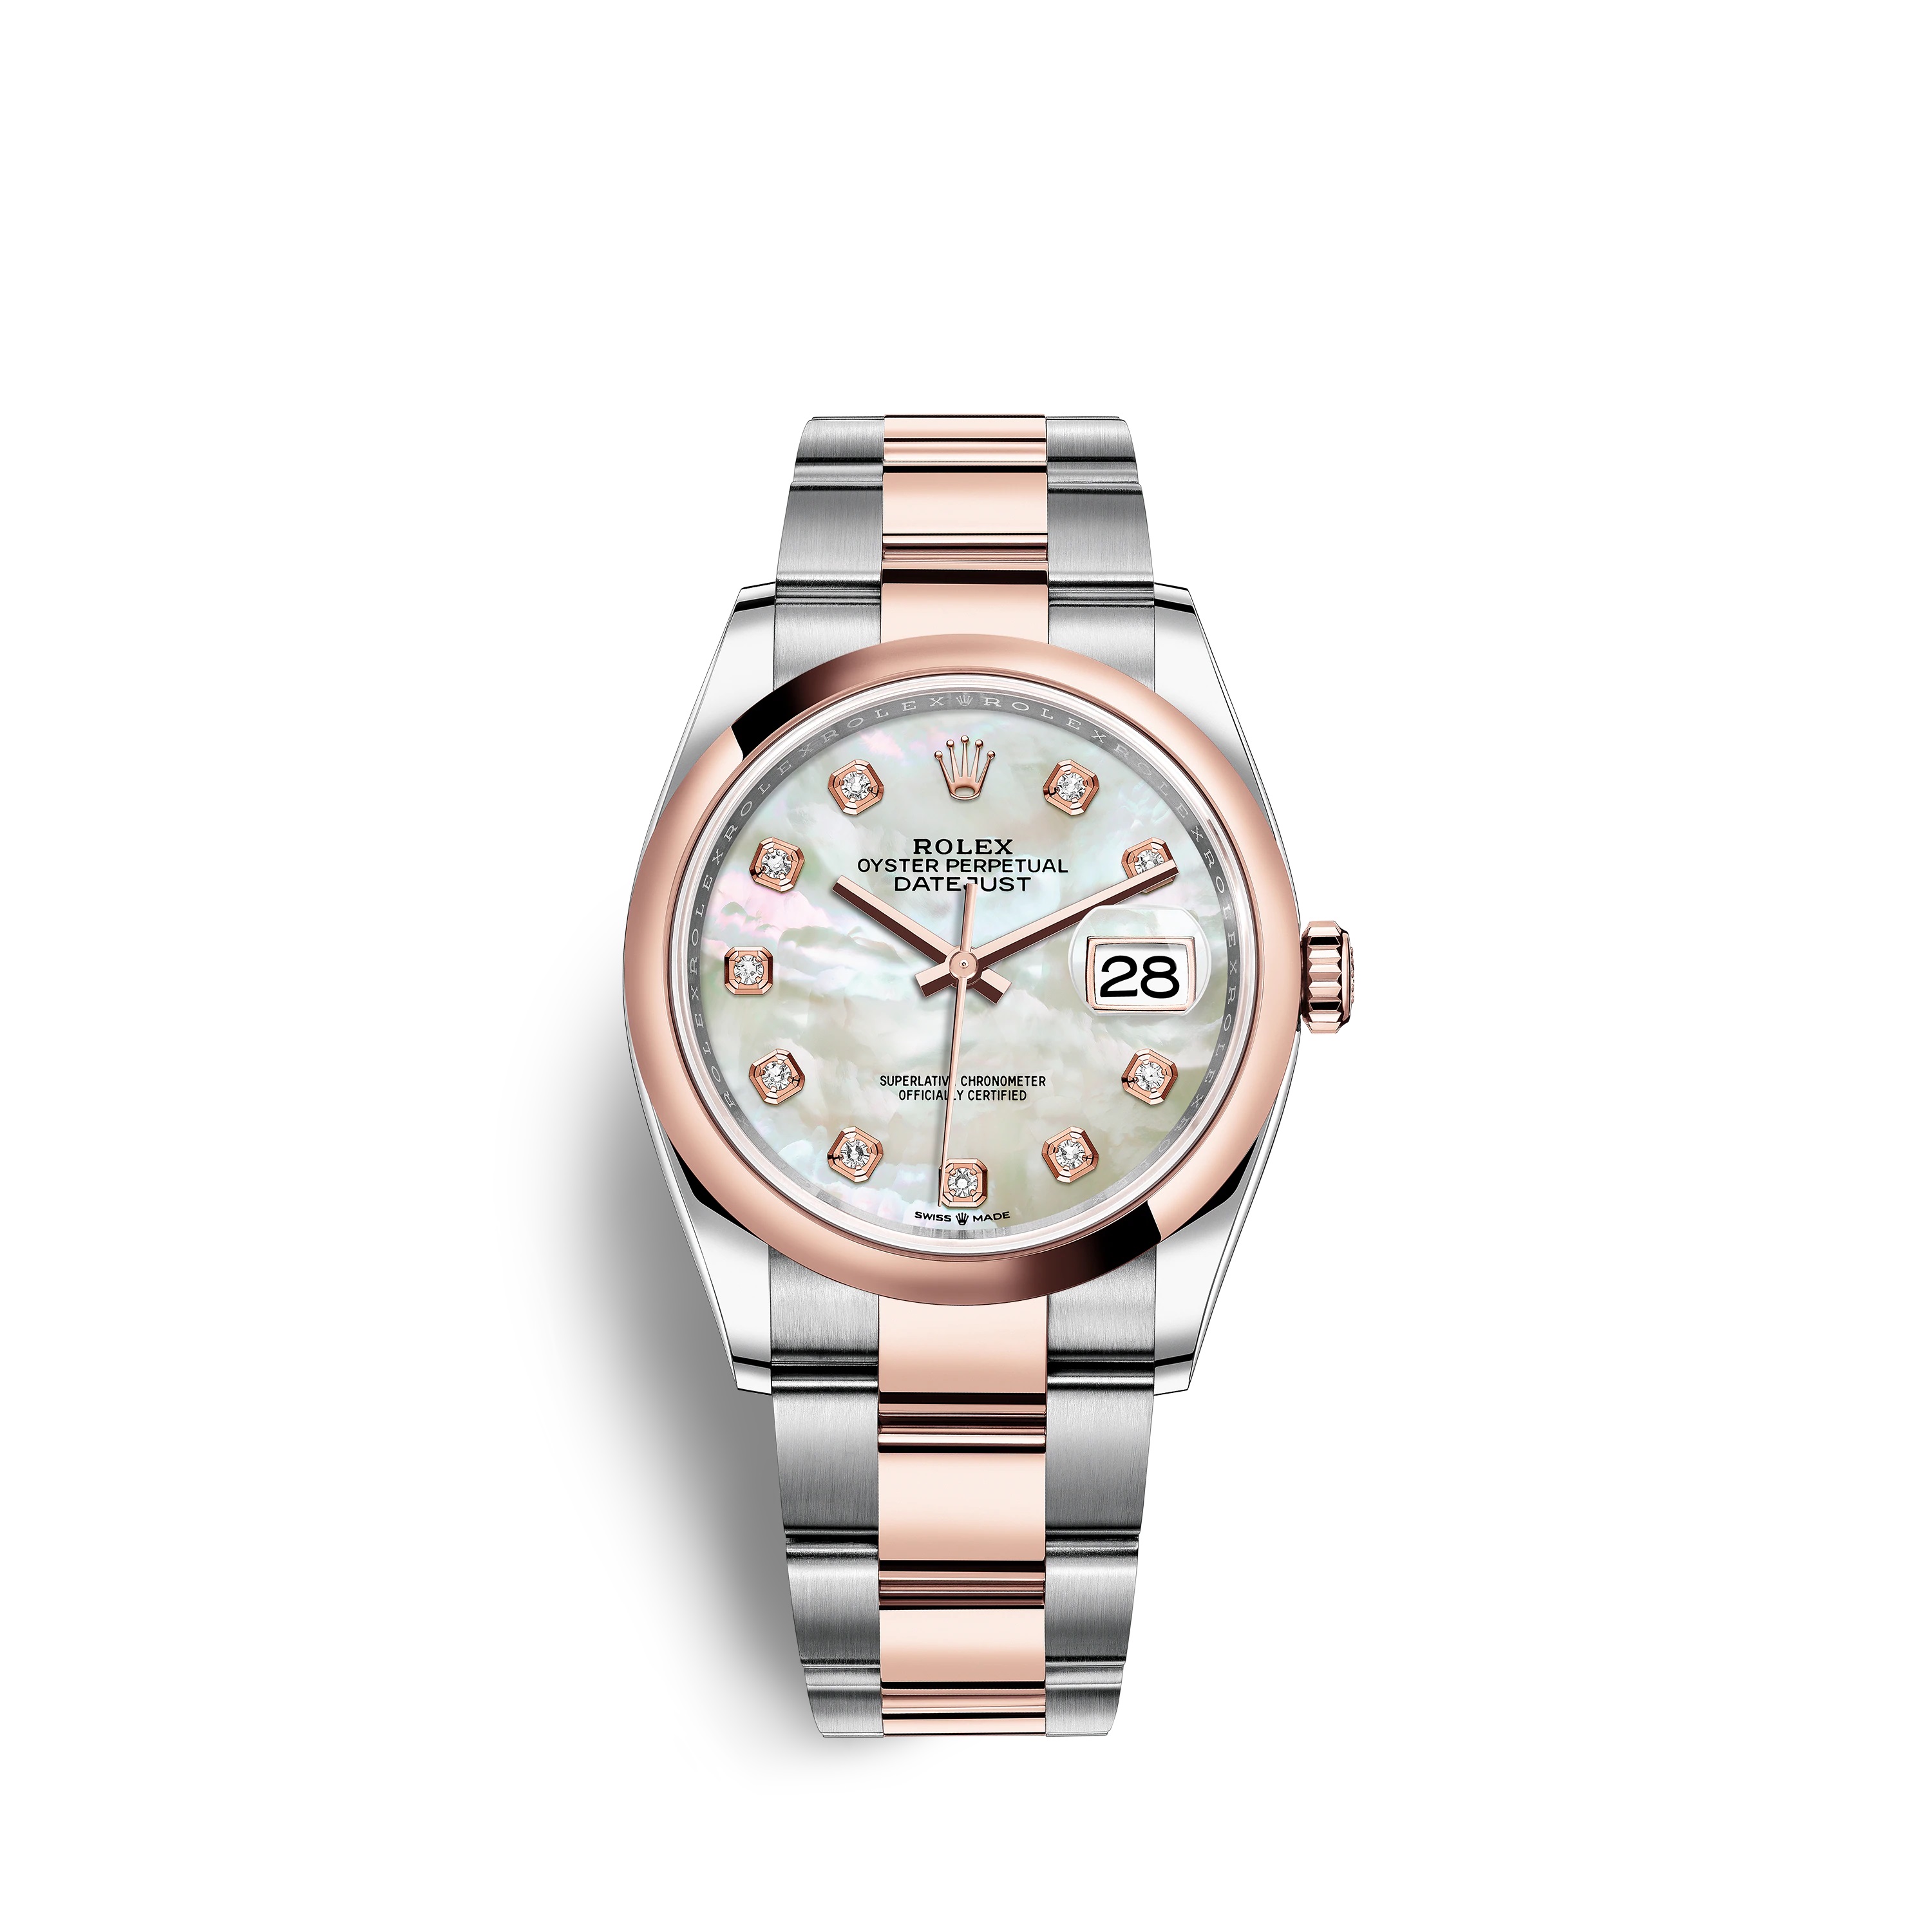 Datejust 36 126201 Rose Gold & Stainless Steel Watch (White Mother-of-Pearl Set with Diamonds)